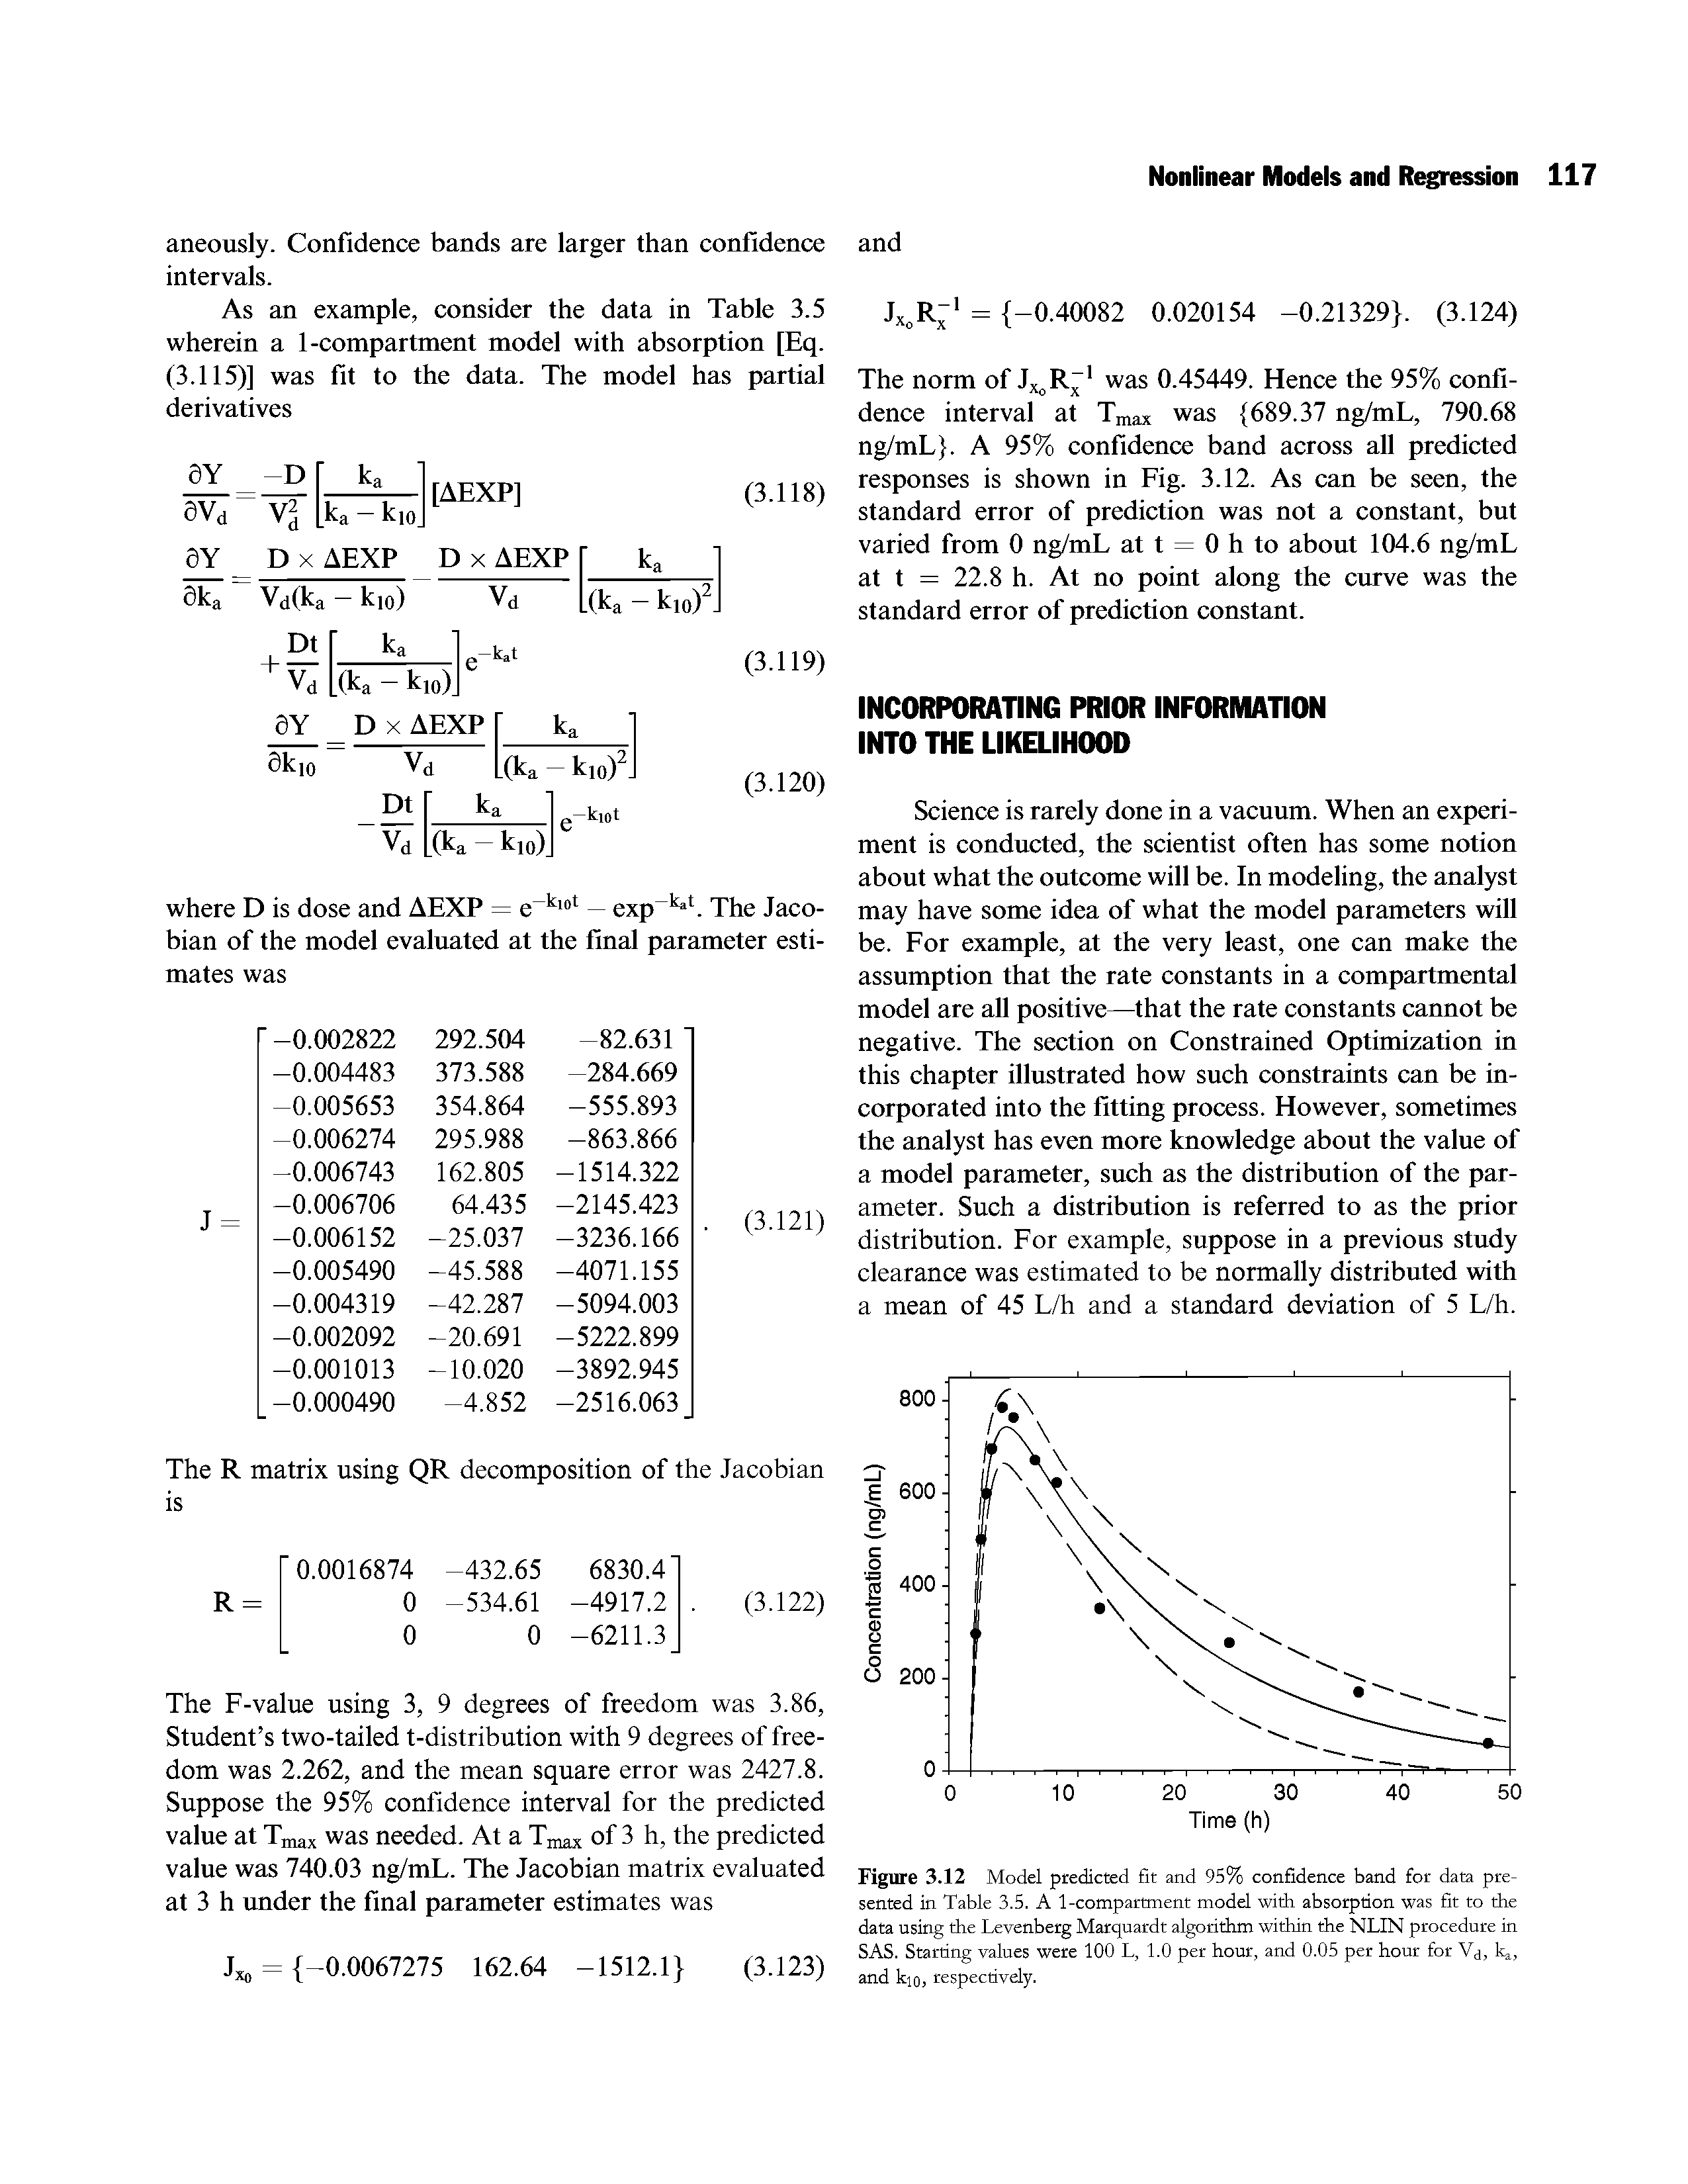 Figure 3.12 Model predicted fit and 95% confidence band for data pre-sented in Table 3.5. A 1-compartment model with absorption was fit to the data using the Levenberg Marquardt algorithm within the NLIN procedure in SAS. Starting values were 100 L, 1.0 per hour, and 0.05 per hour for Vd, Iq, and kio, respectively.